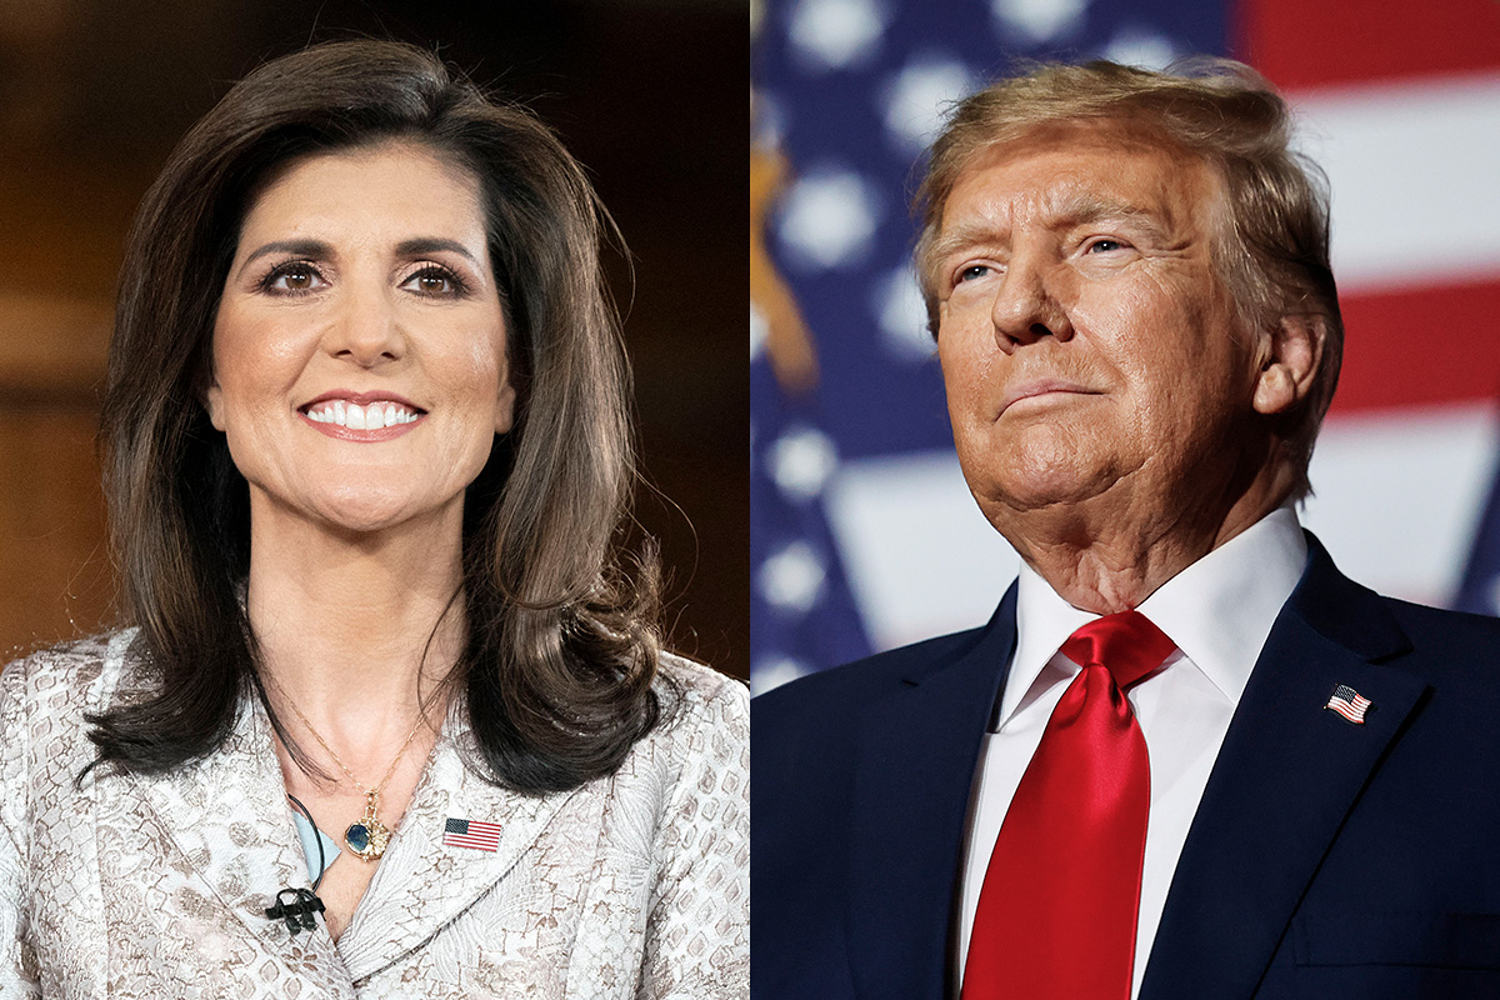 Trump and Nikki Haley face off in South Carolina as early exit poll results roll in